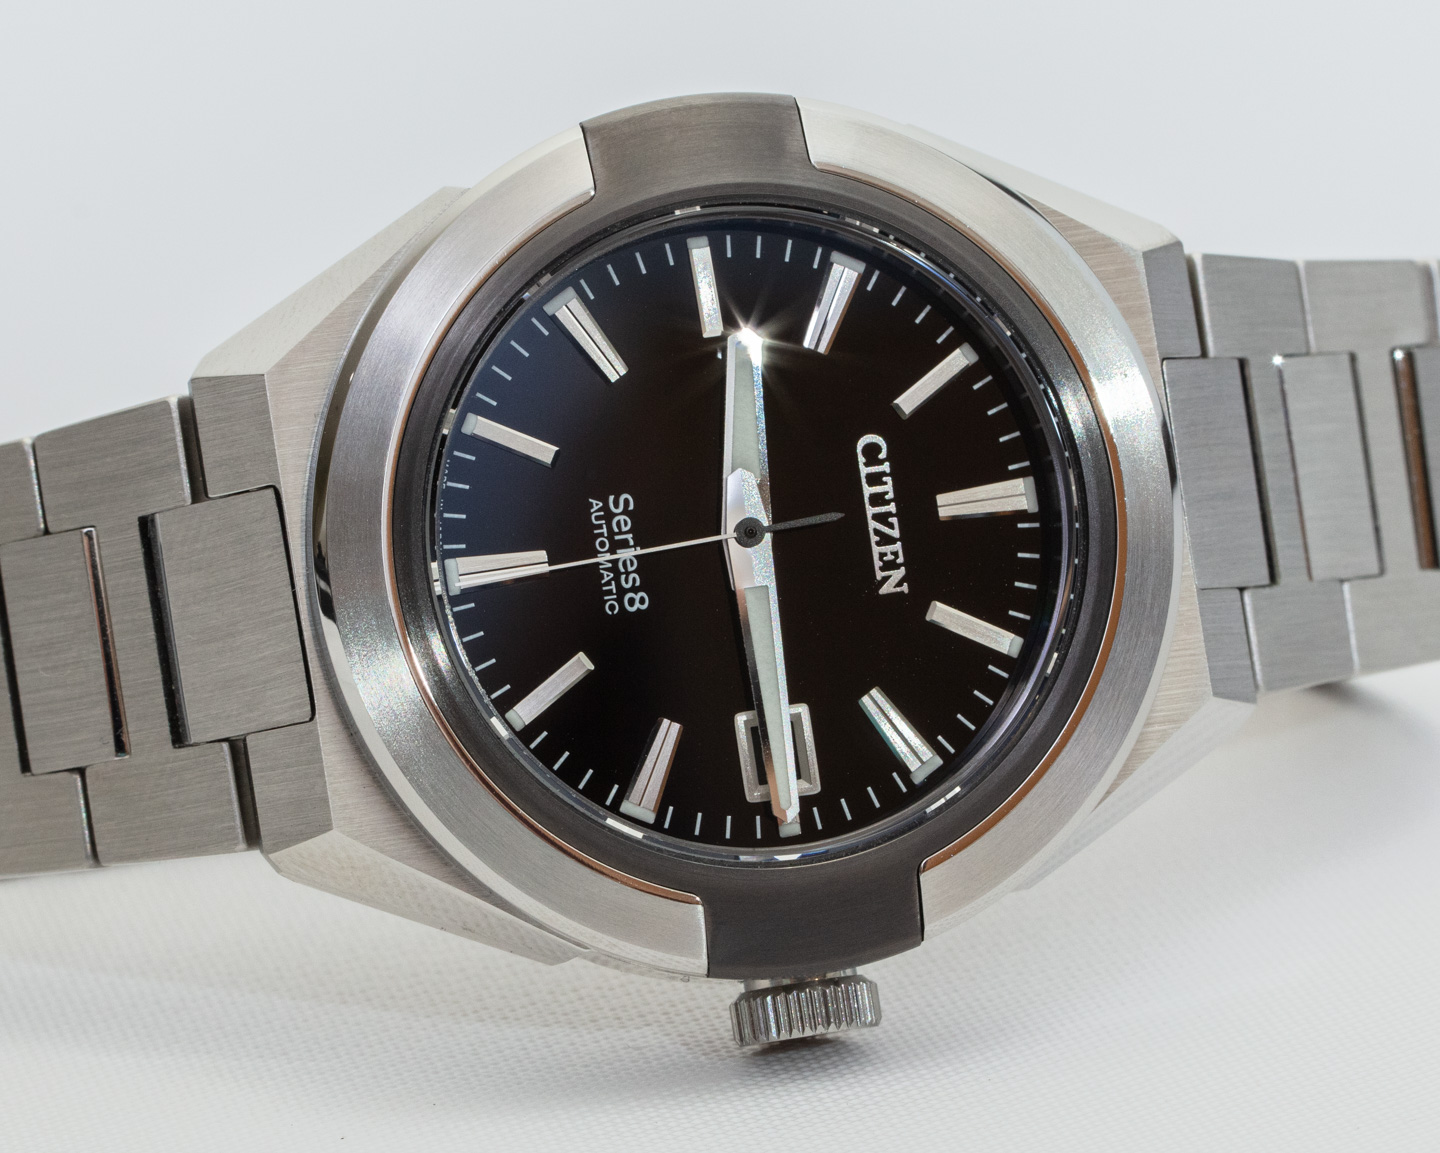 Watch Review: Citizen Series 8 870 Automatic